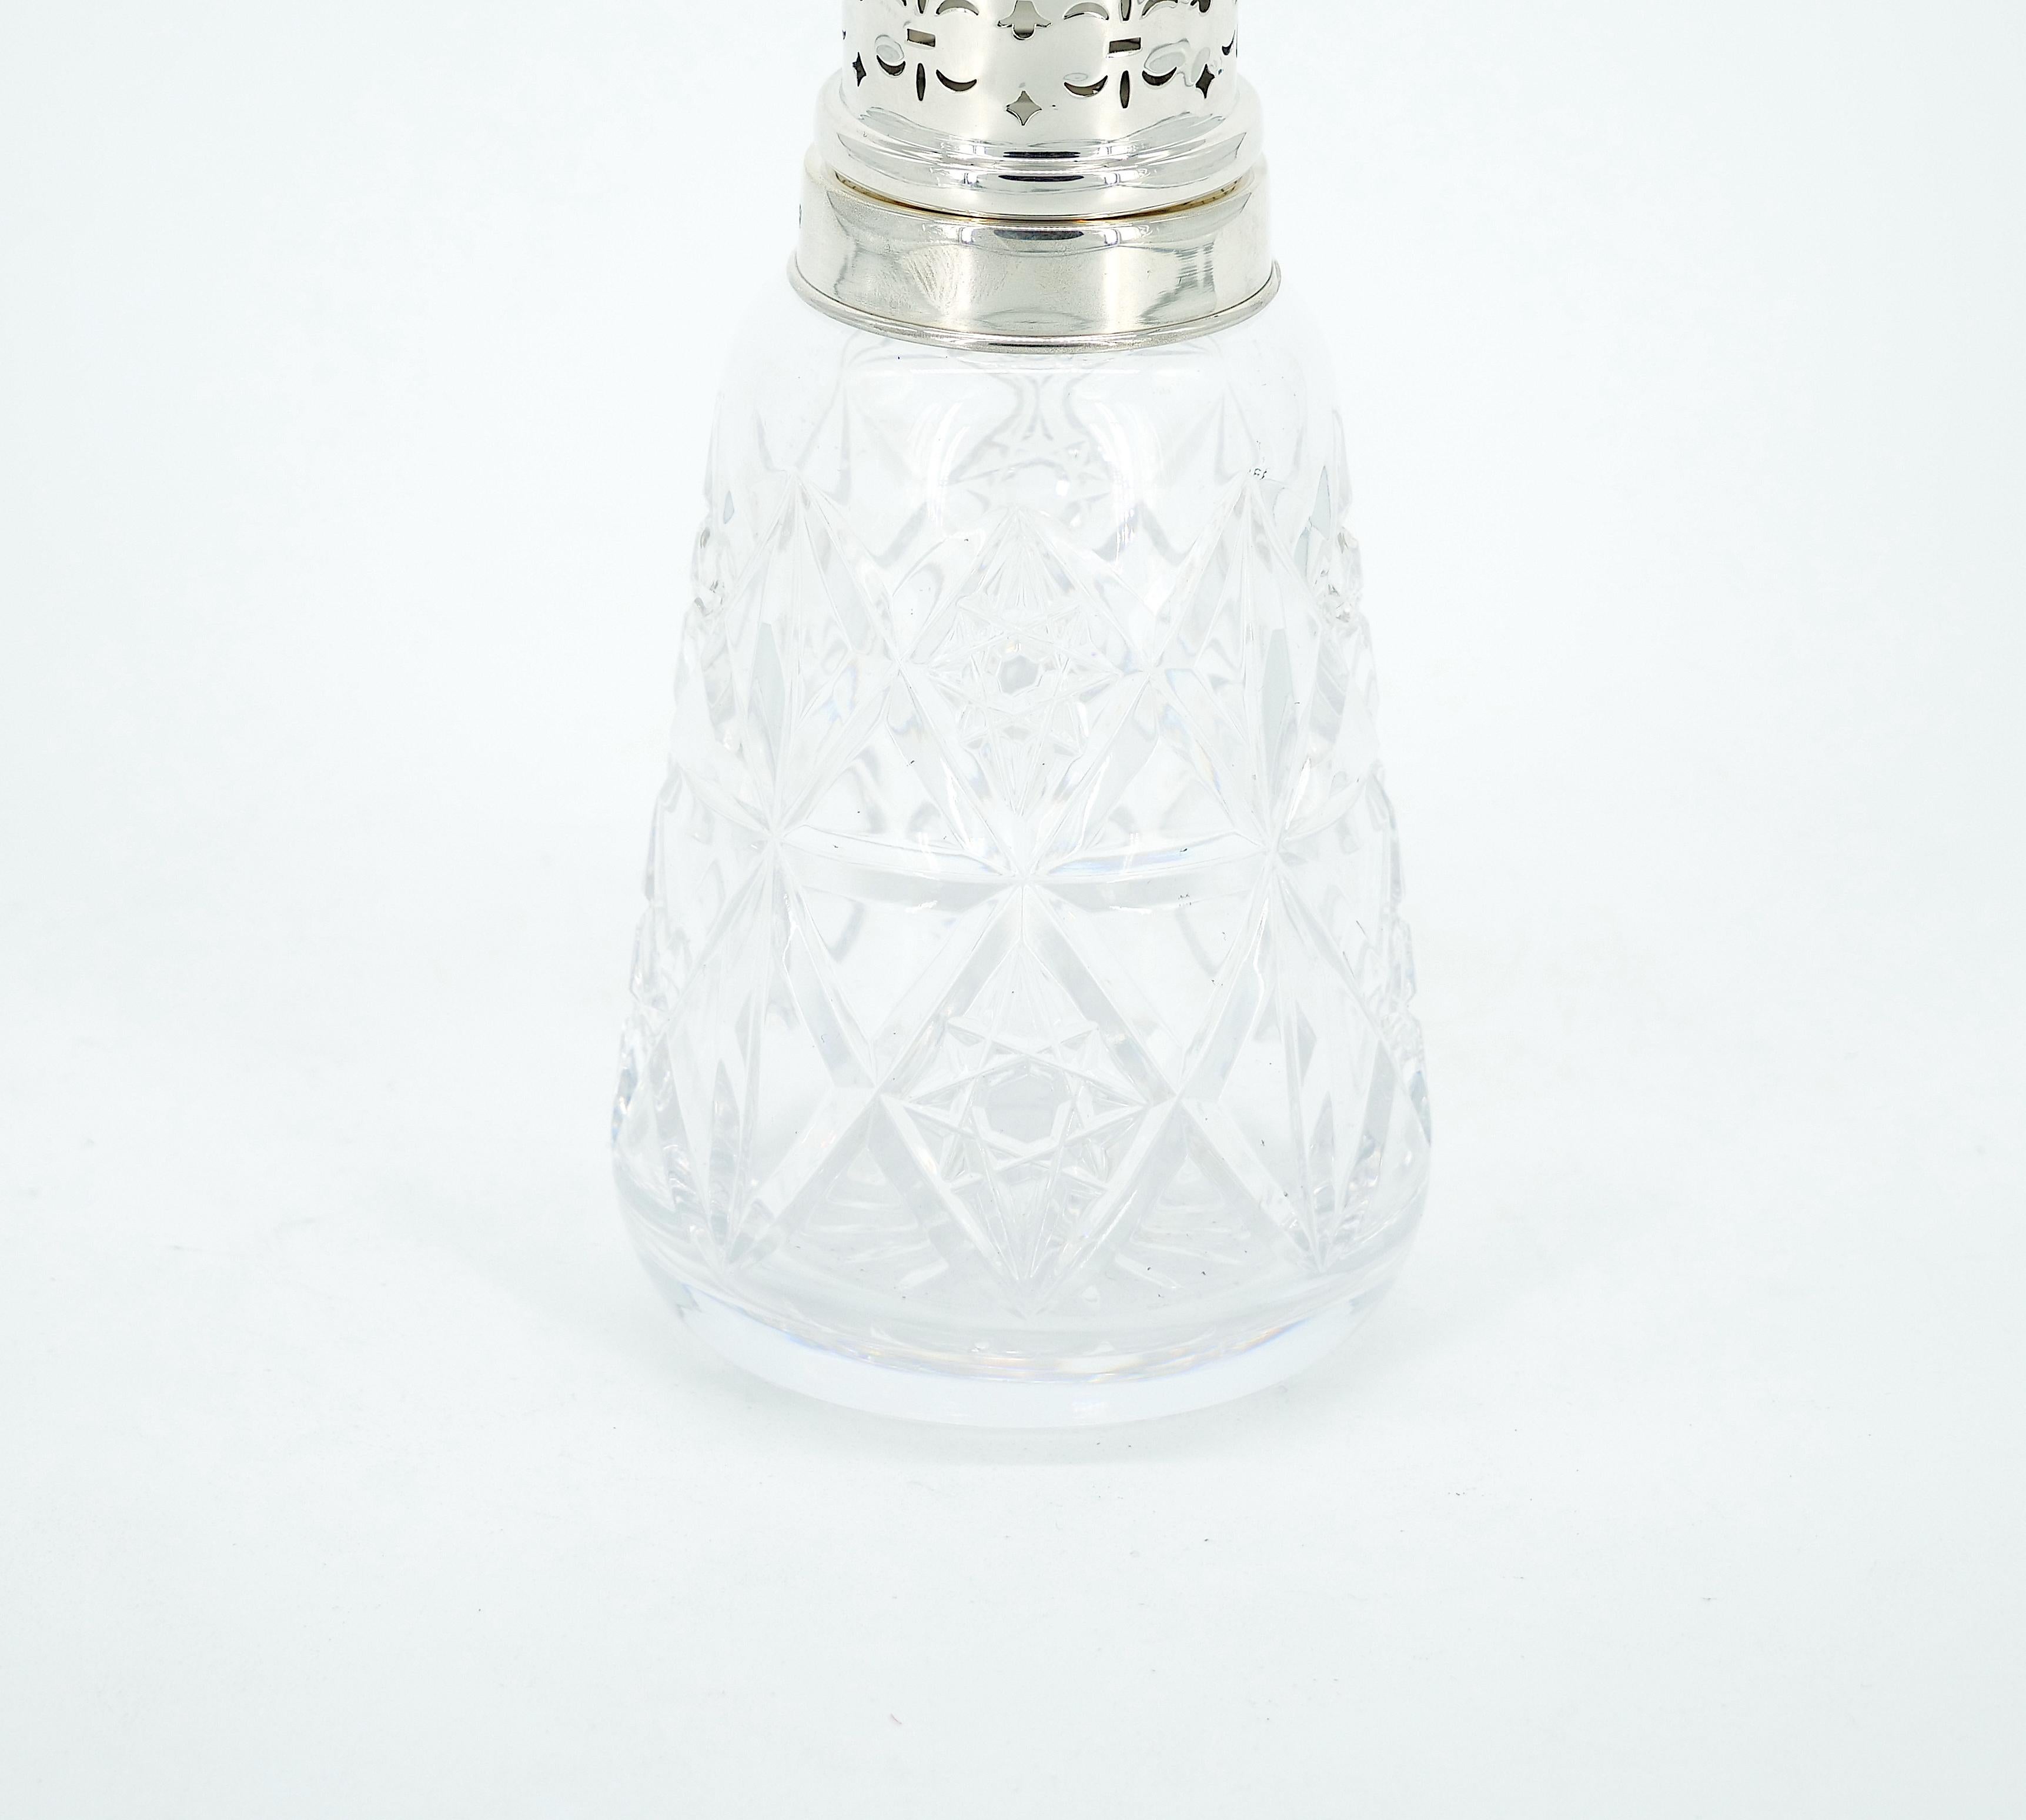 20th Century English Sterling Silver Top / Cut Glass Tableware Sugar Receptacle For Sale